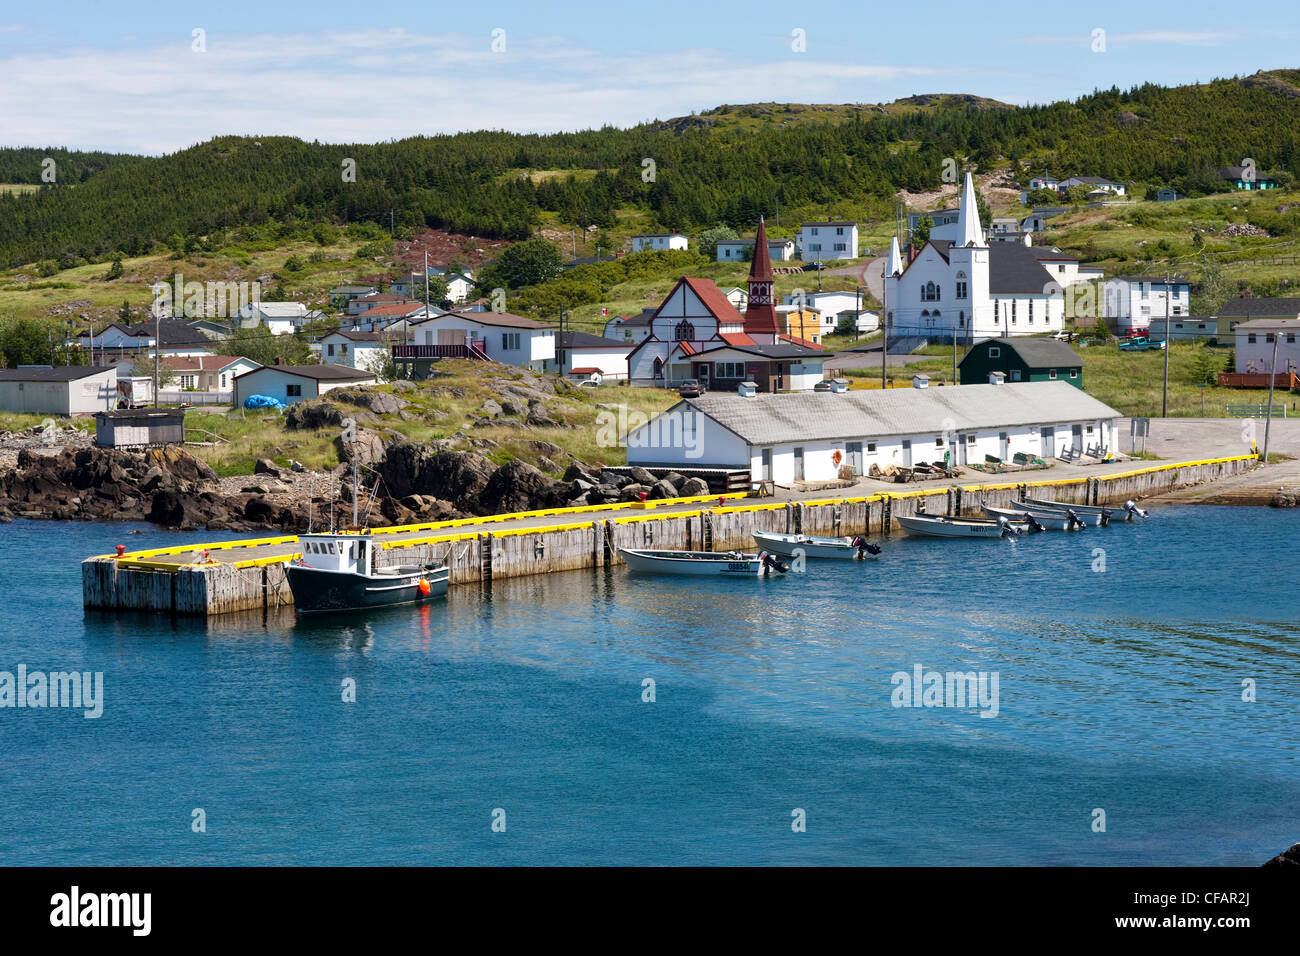 Fishing boats tied up at the wharf in Winterton, Newfoundland and Labrador, Canada. Stock Photo